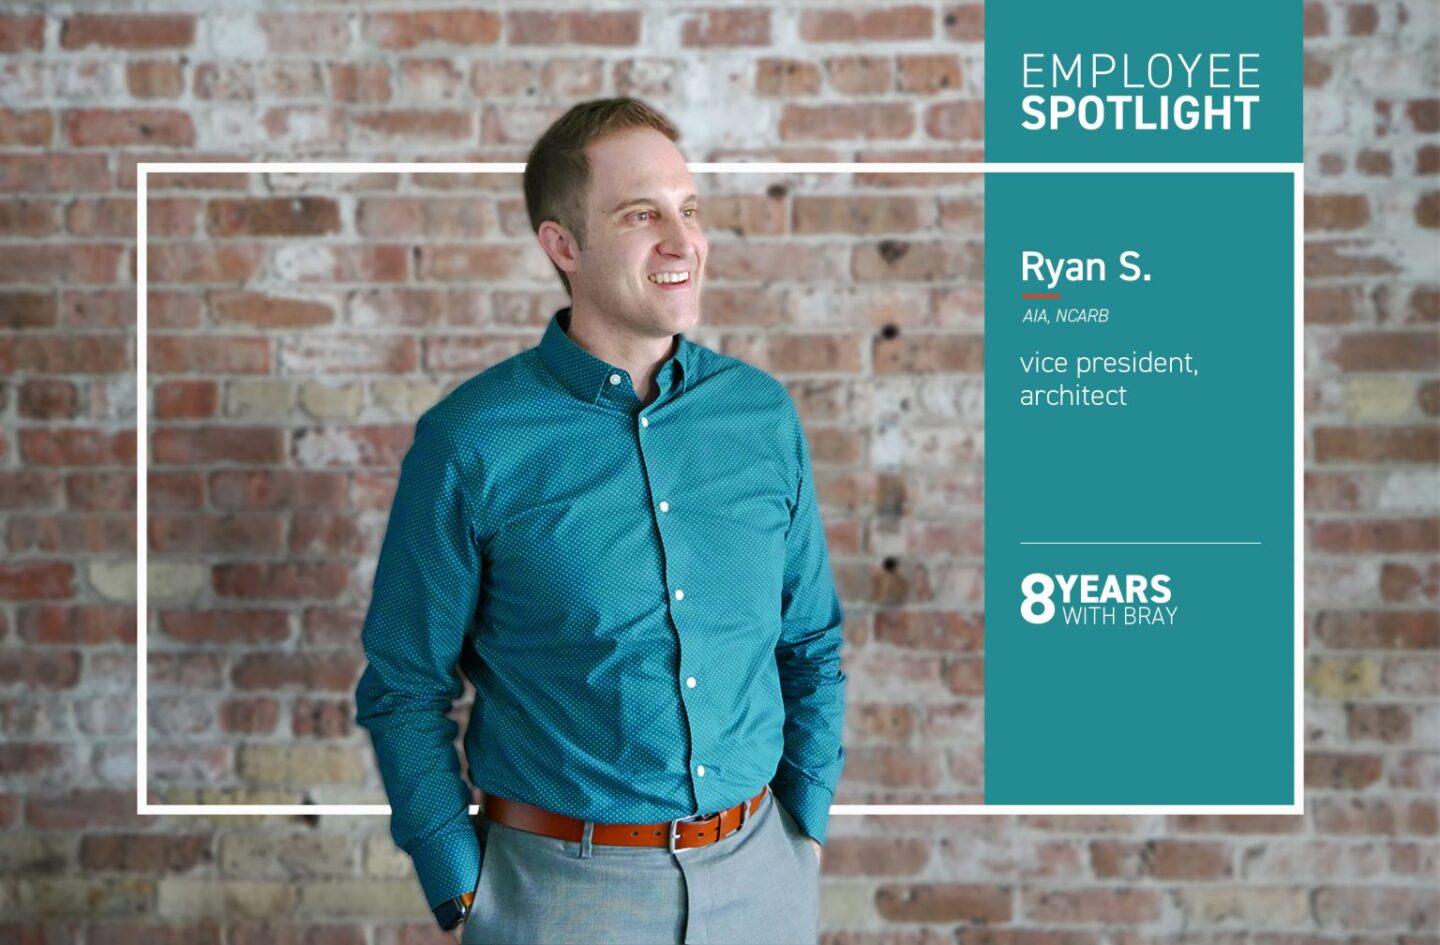 Photo and graphic of Ryan Sands, celebrating eight years with Bray Architects